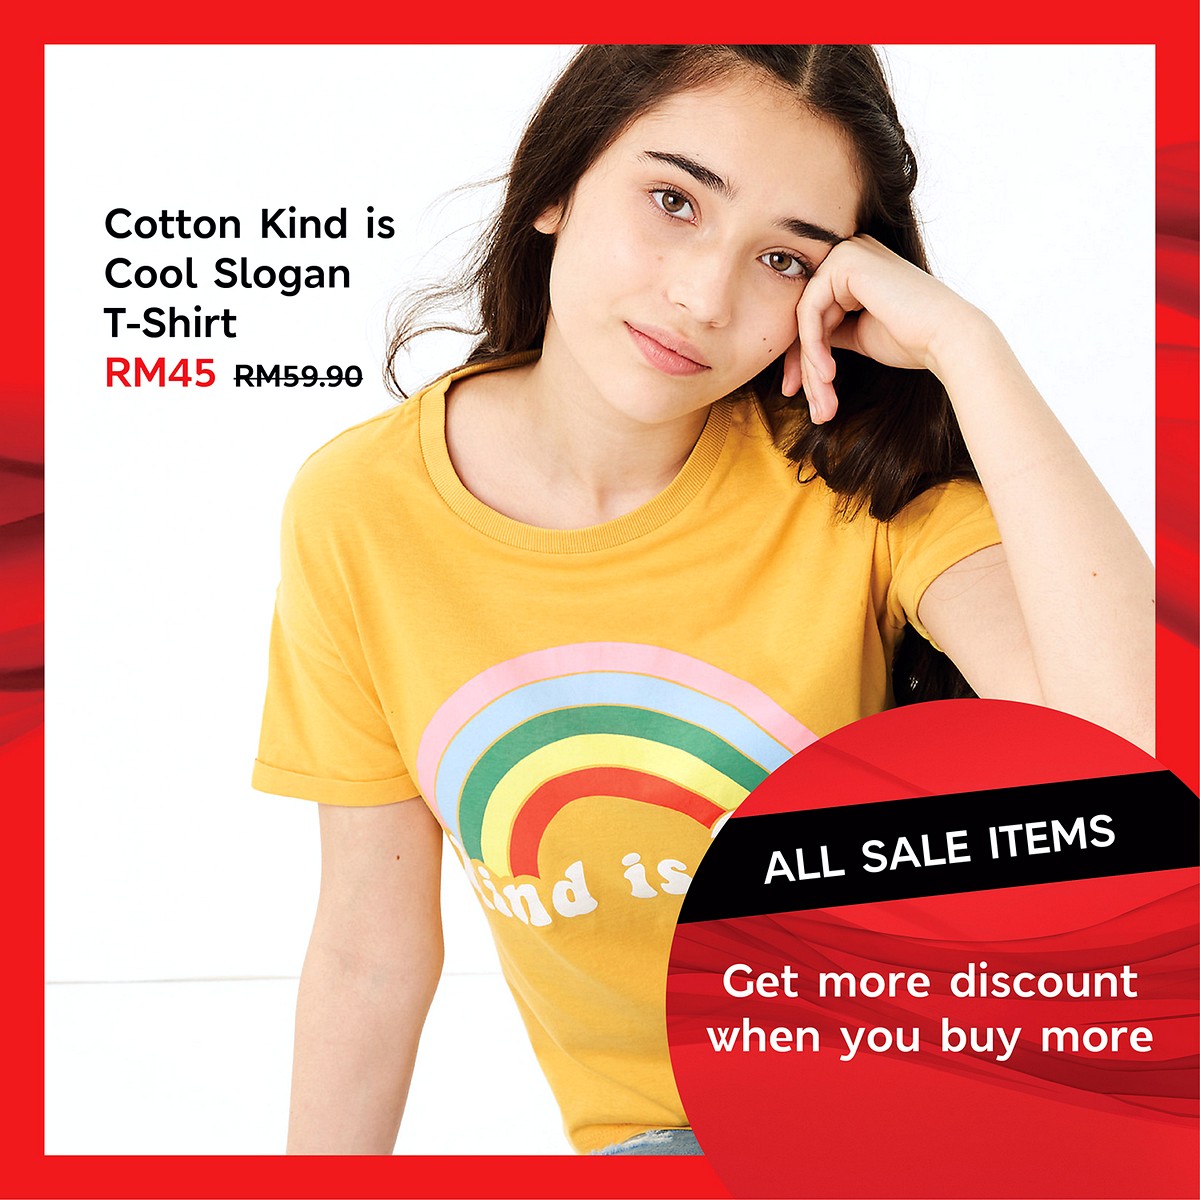 ESS-Extra-Discount_Social-Artwork-15 - Apparels Baby & Kids & Toys Children Fashion Fashion Accessories Fashion Lifestyle & Department Store Johor Kuala Lumpur Lingerie Nationwide Penang Selangor Sportswear Underwear Warehouse Sale & Clearance in Malaysia 